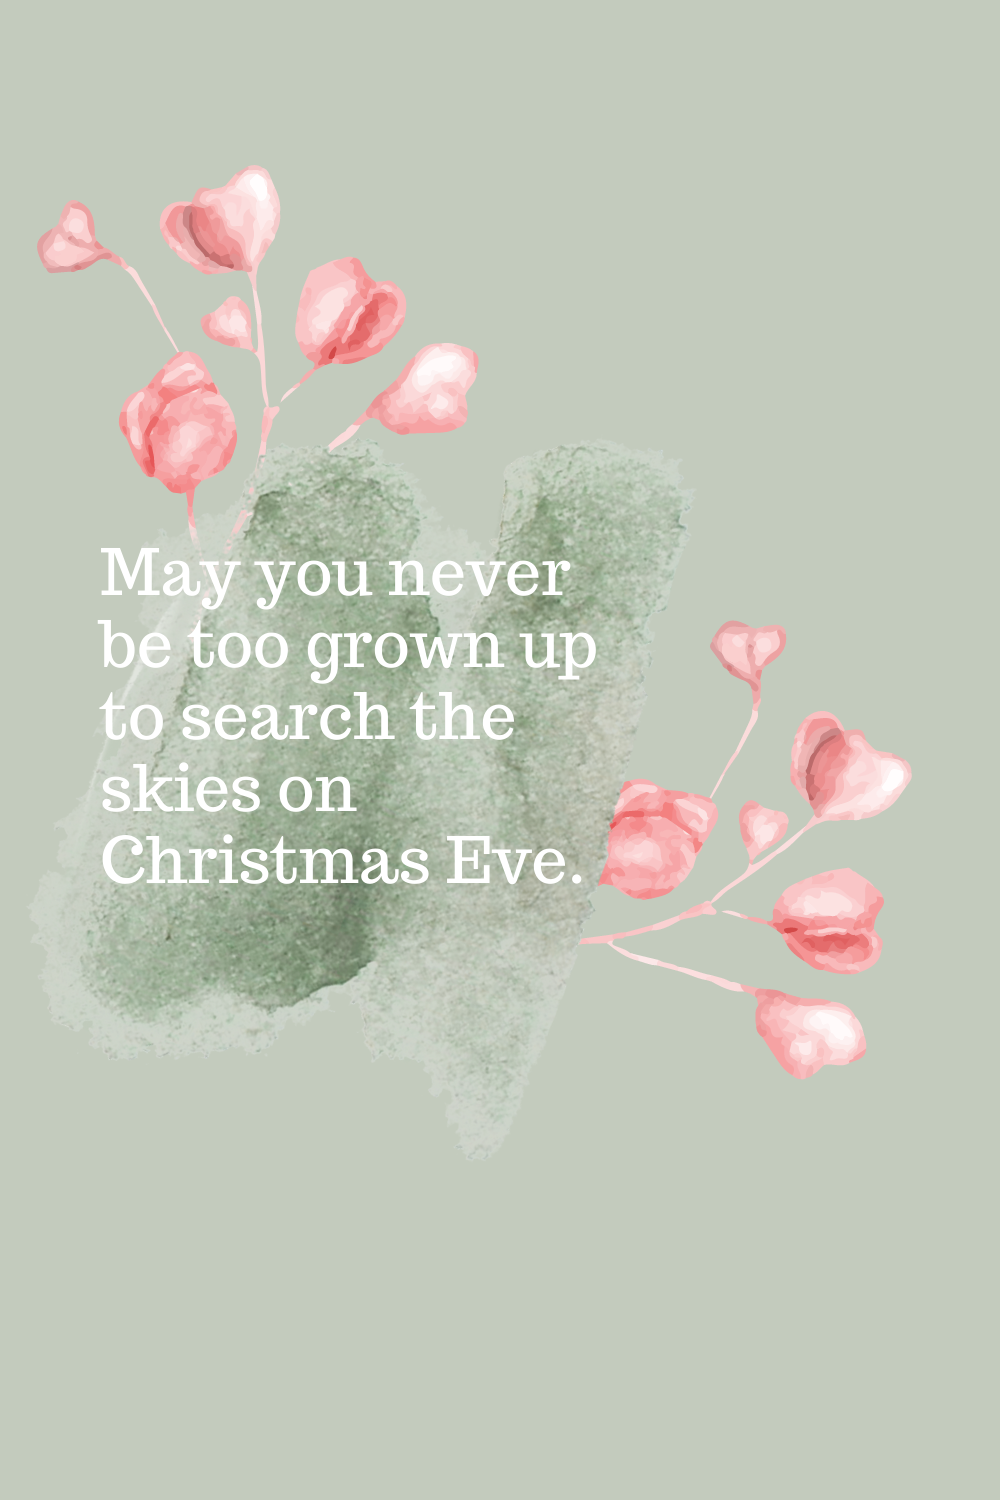 May you never be too grown up
to search the skies on 
Christmas Eve.